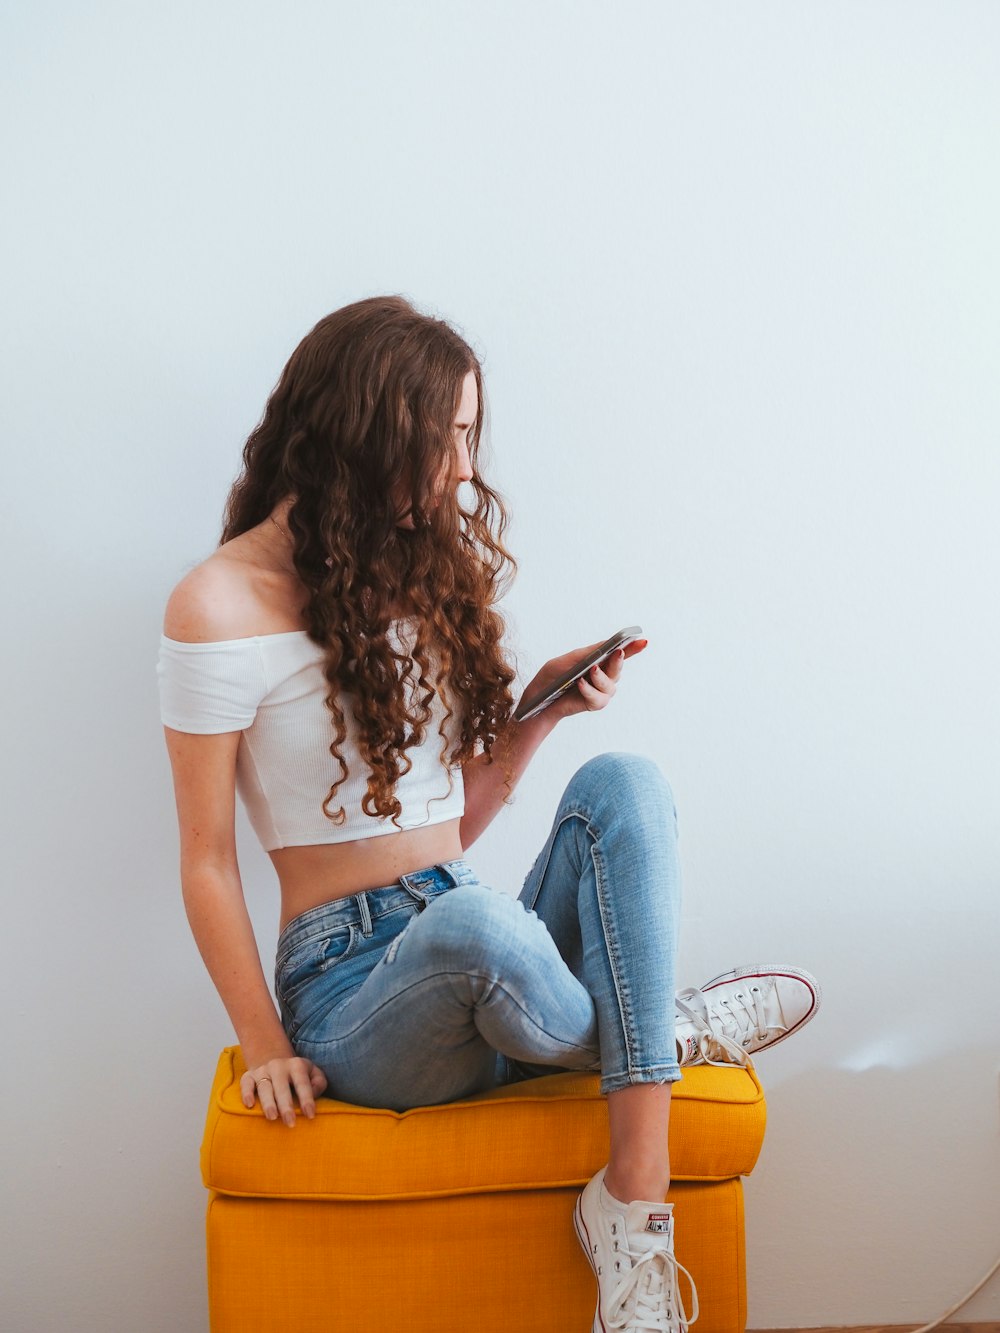 woman in white shirt and blue denim jeans sitting on yellow chair